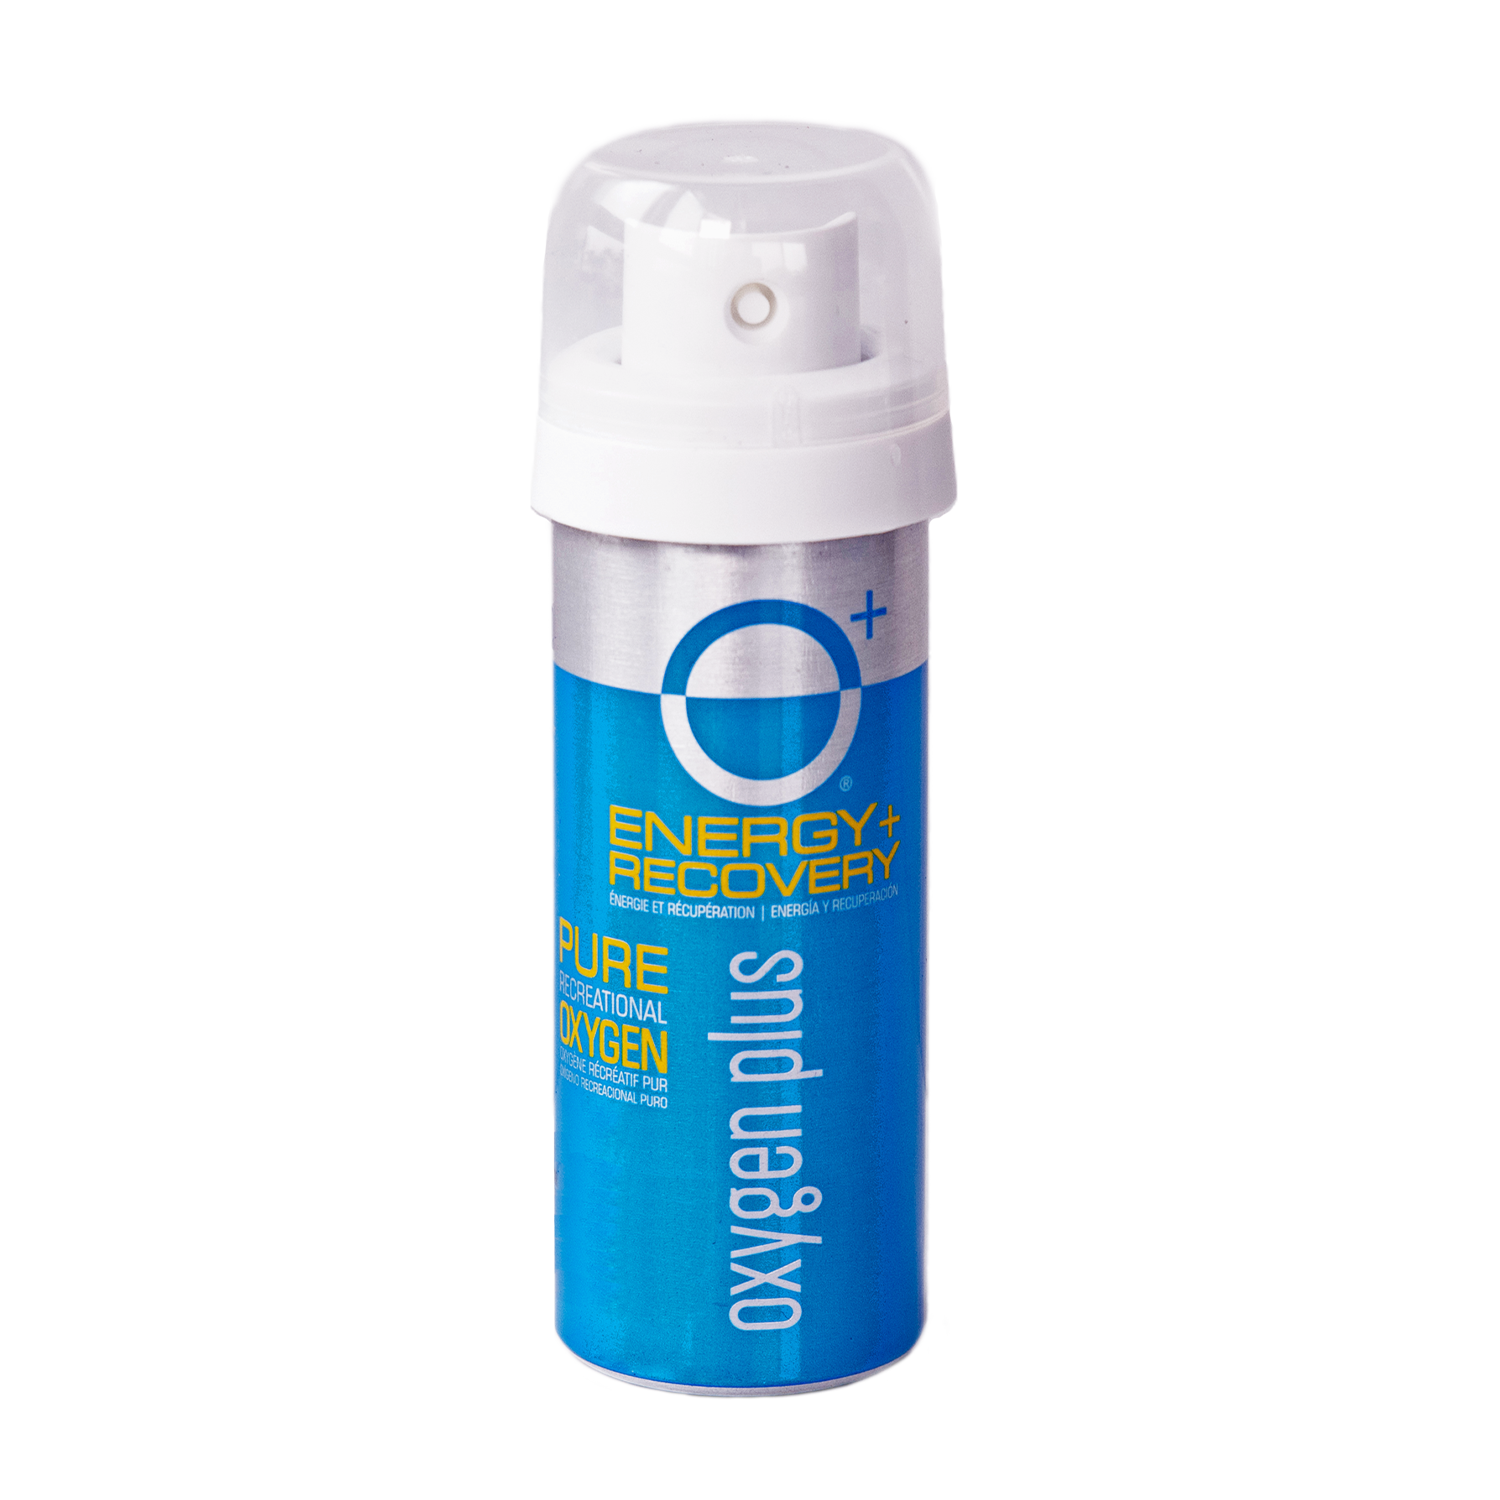 O+ Mini – Single Canister – 1.55 Liters, 24+ Breaths Per Canister